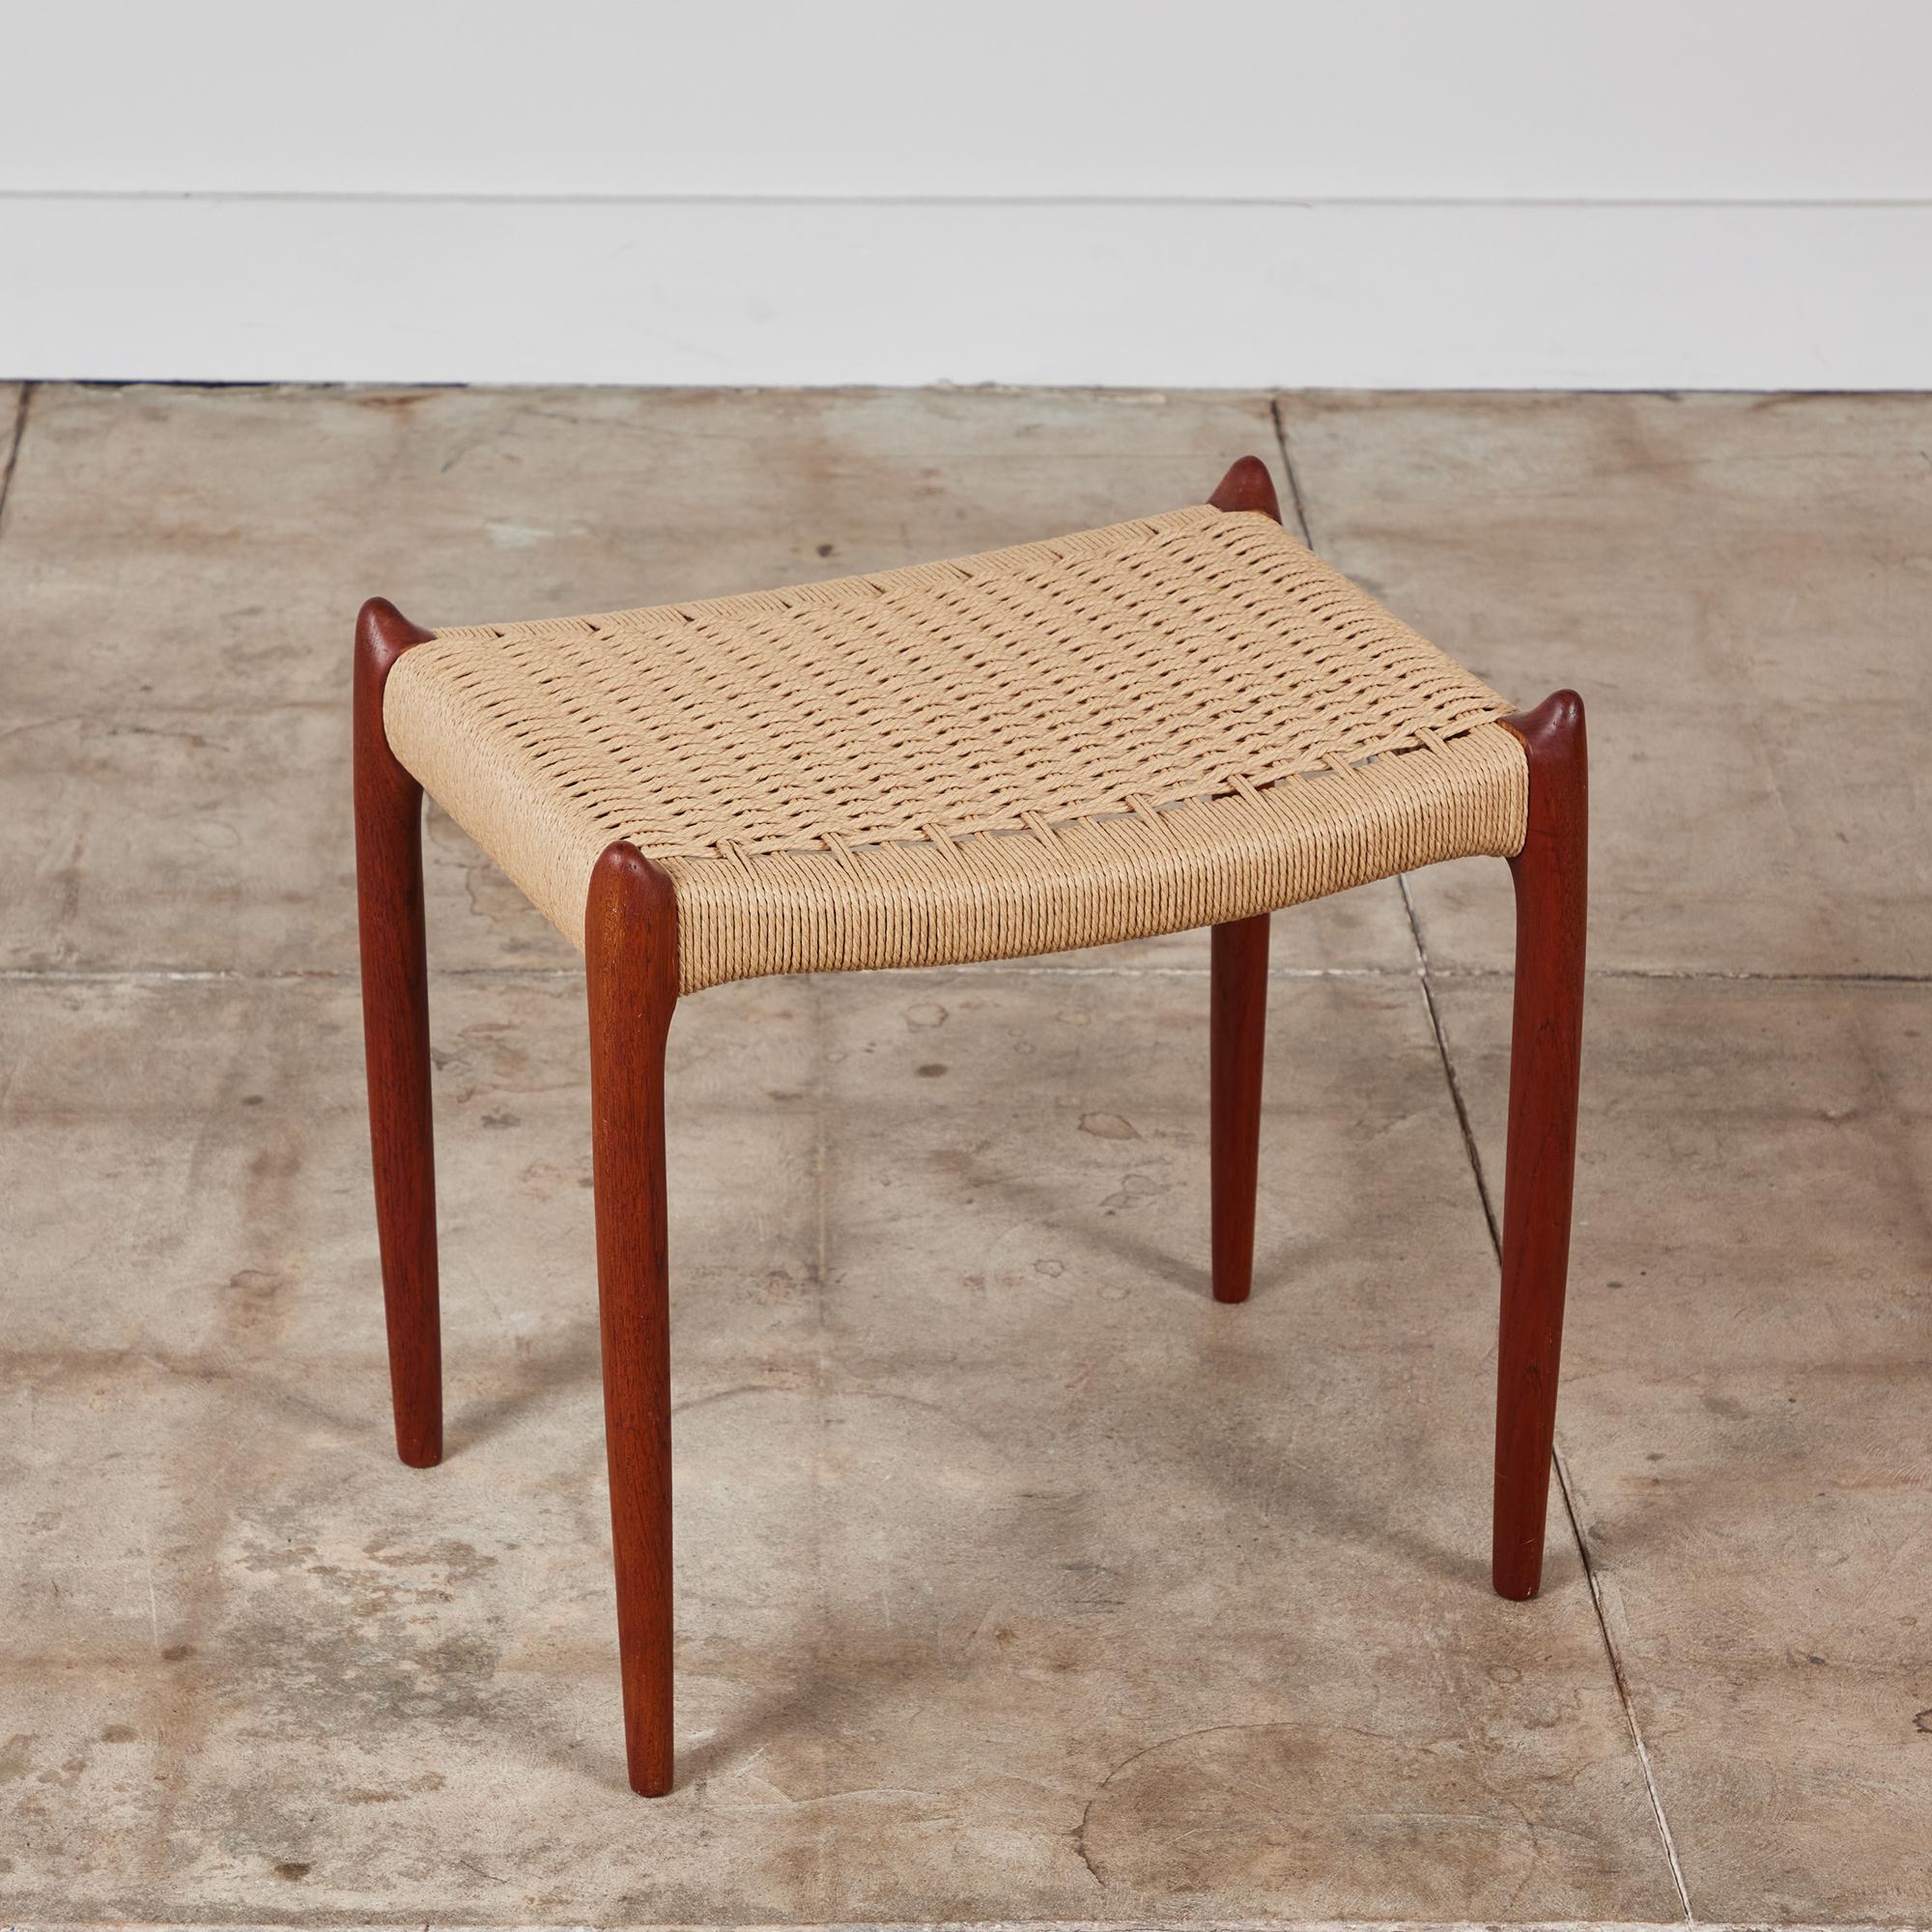 Niels Møller's Model 78A ottoman, designed in 1963 is a simple footrest with Danish cord upholstery and slightly tapered legs, manufactured by the designer's family company, JL Møllers Møbelfabrik. Danish cord three-ply, a twisted paper of superior